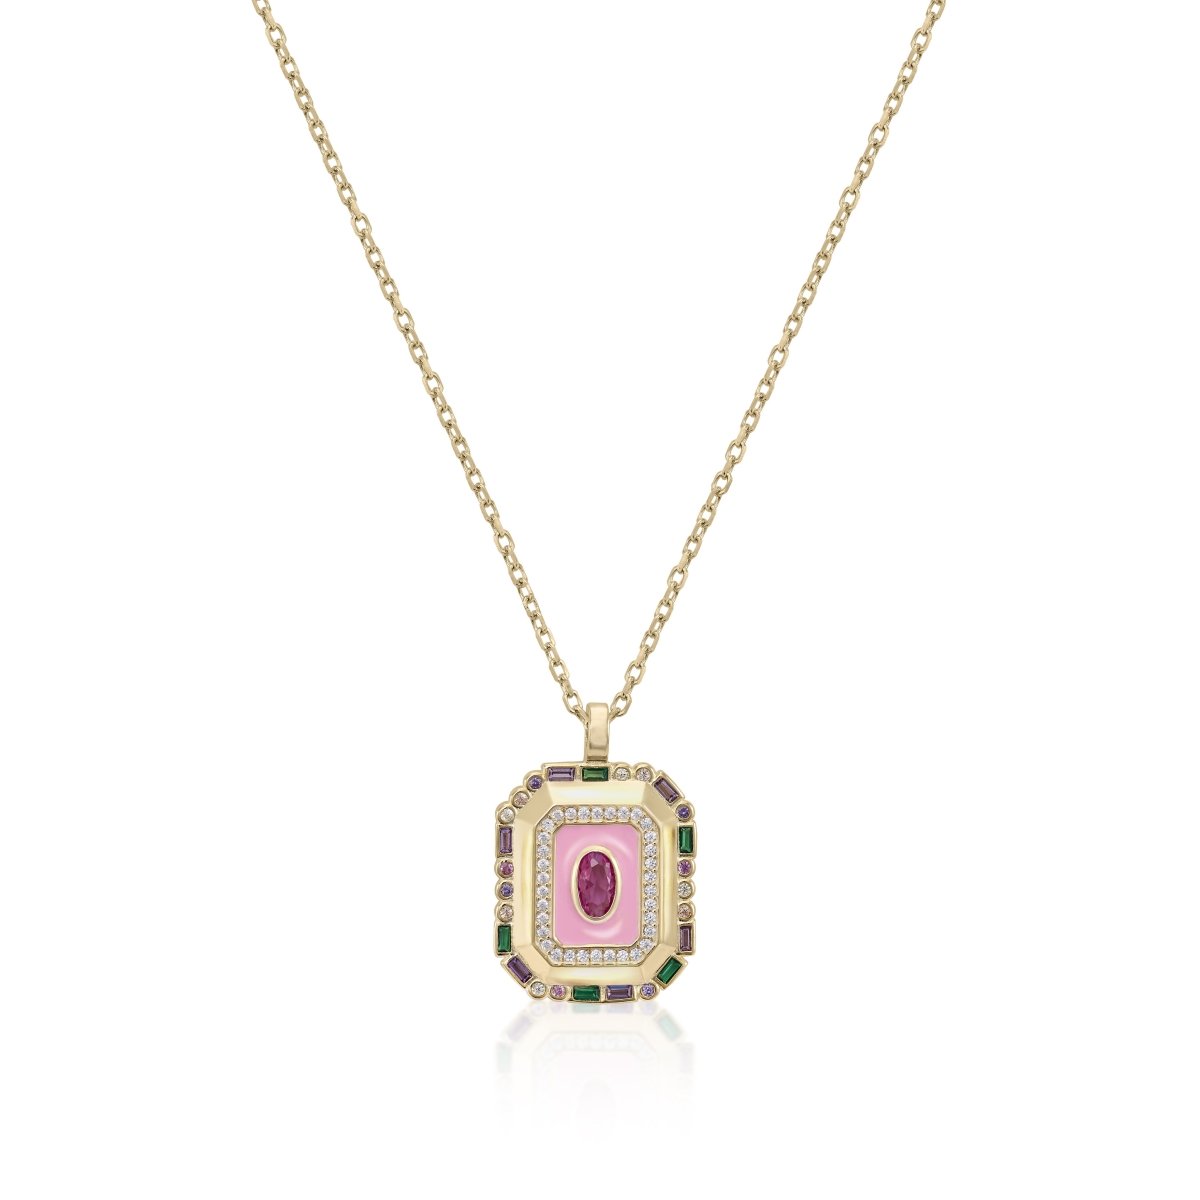 Necklace medal octagonal design with gems and enamel - LINEARGENT